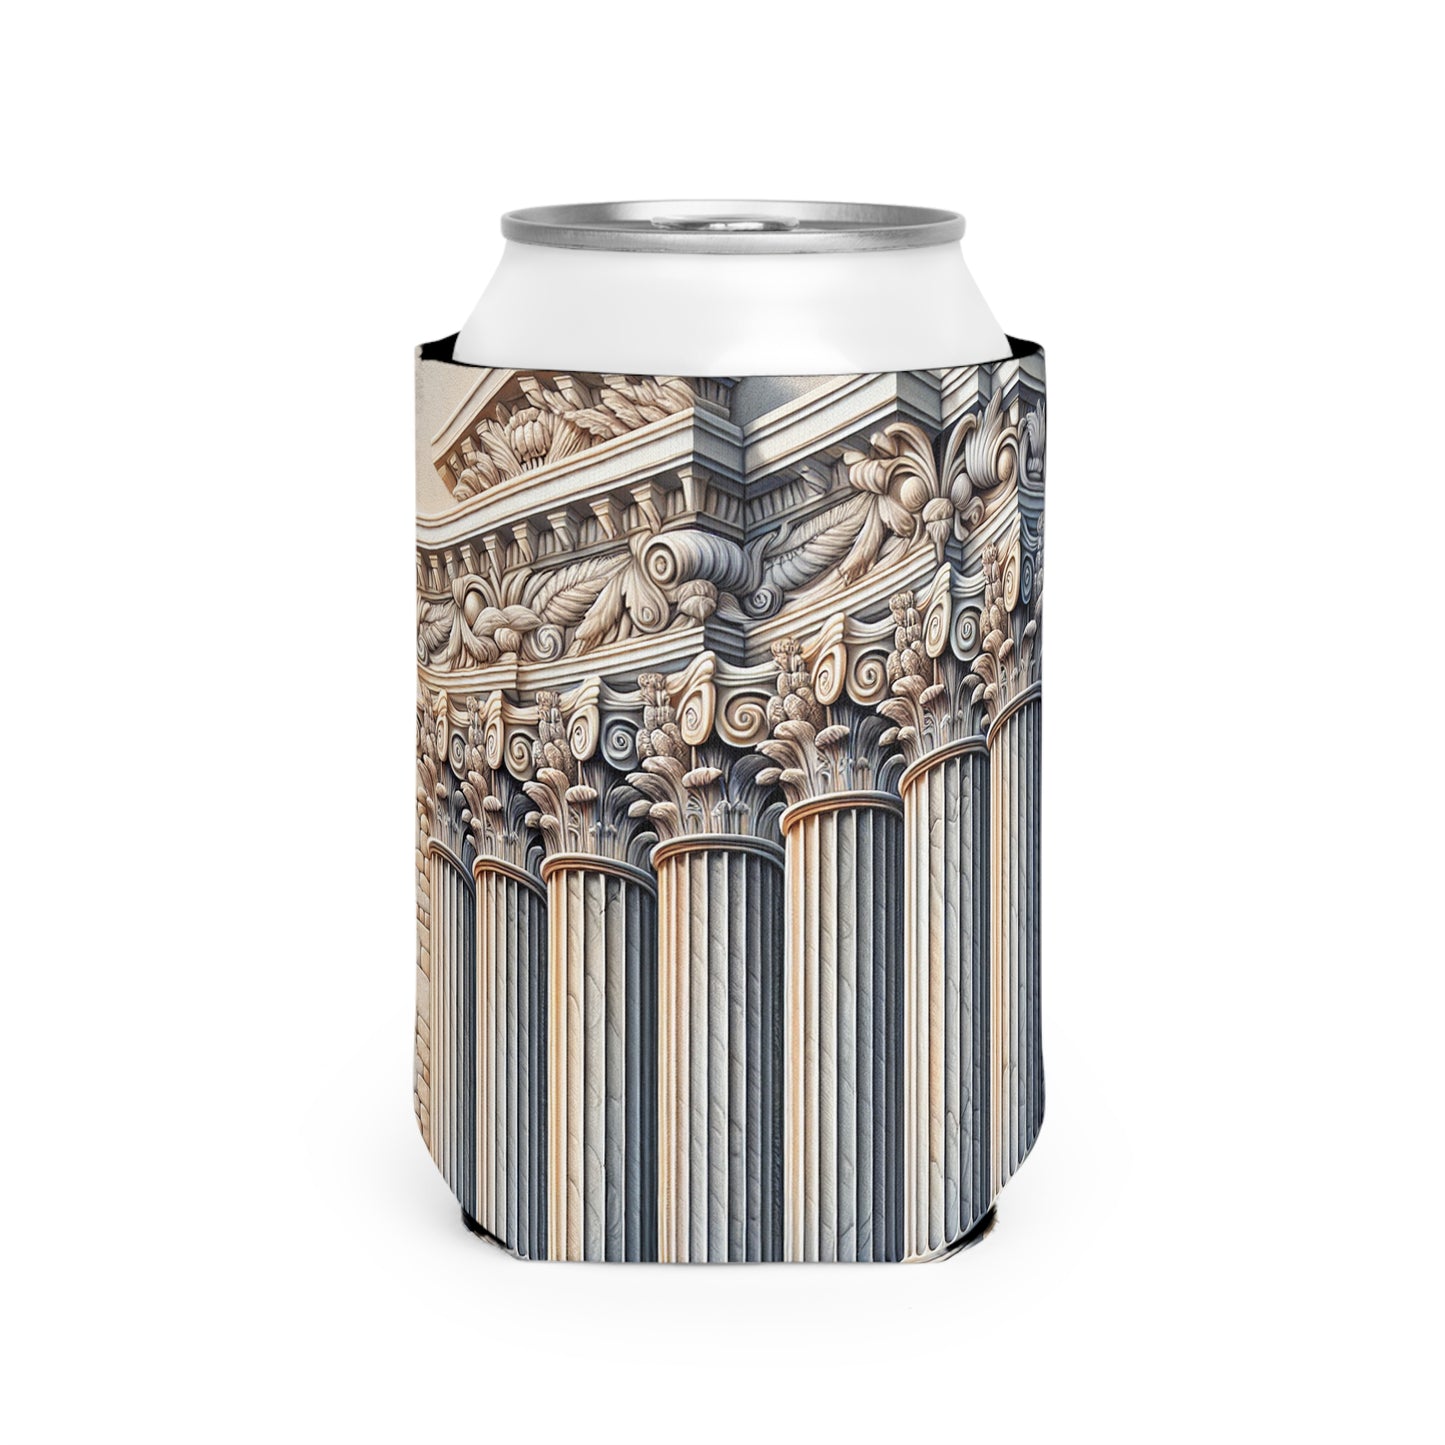 "3D Wall Columns: An Architectural Artpiece" - The Alien Can Cooler Sleeve Trompe-l'oeil Style